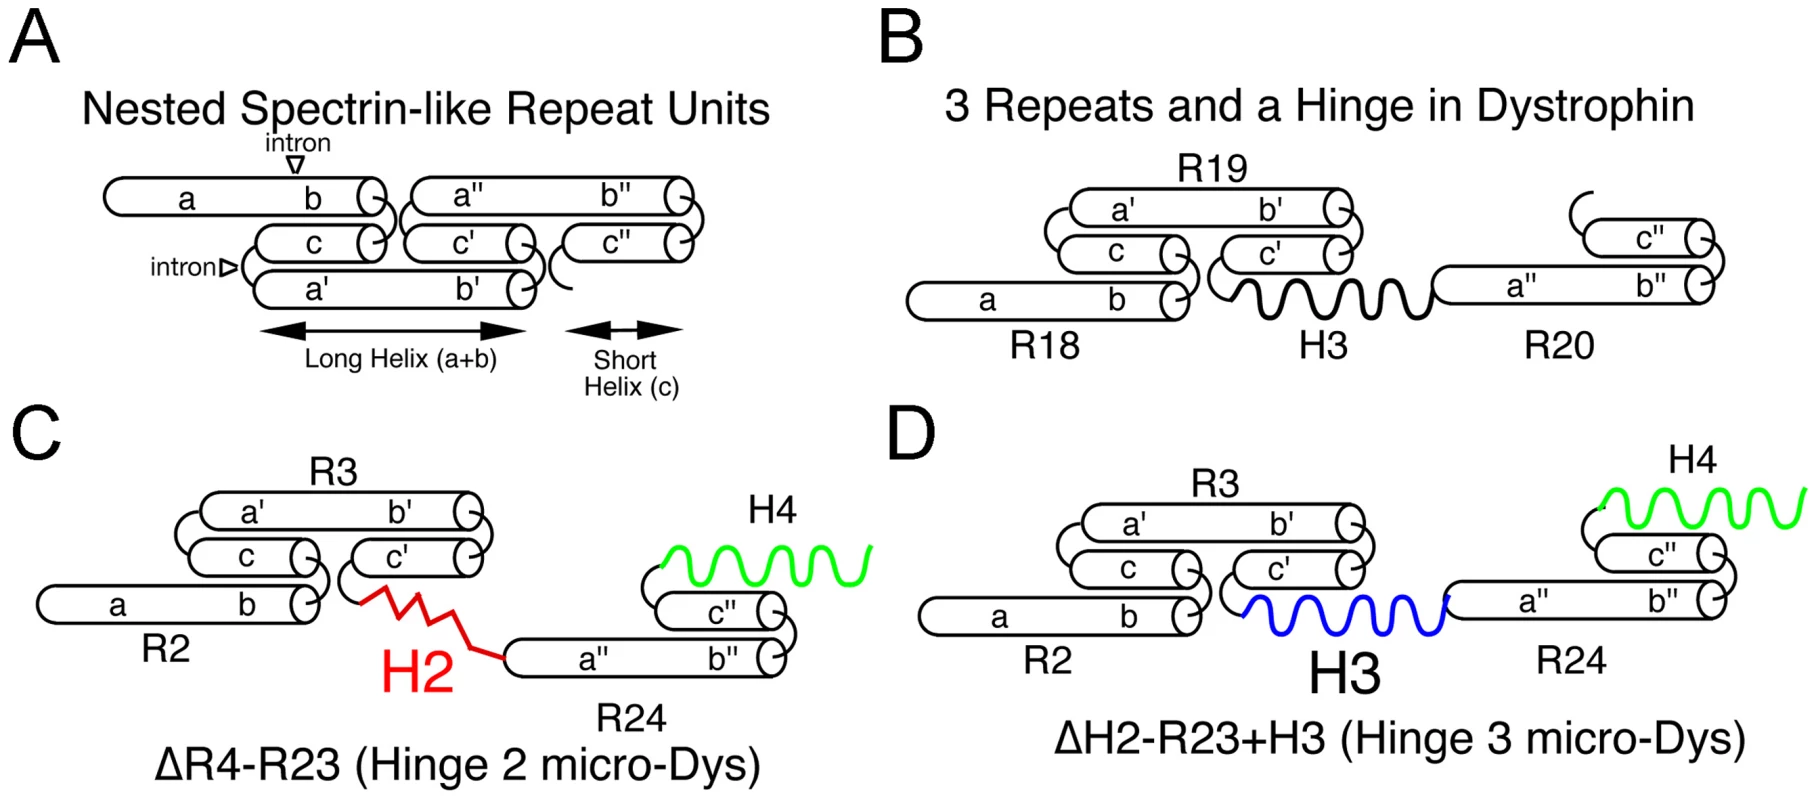 Predicted nested structure of specific dystrophin spectrin-like repeats relevant to microdystrophins and how they interact with hinge domains.